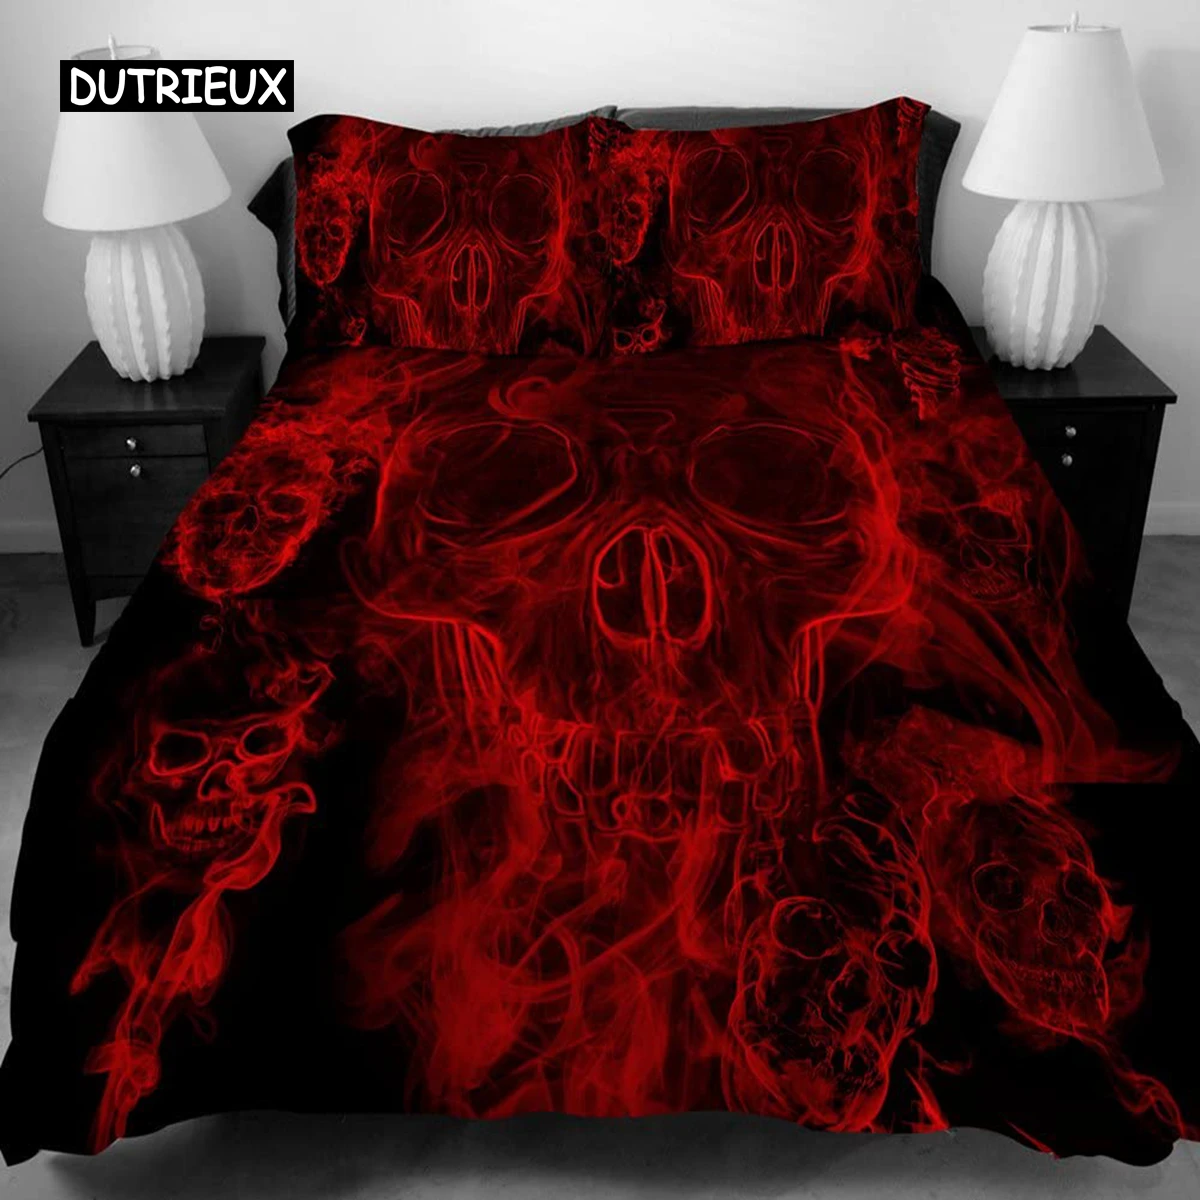 

3 PCS Duvet Cover Set With Zipper Closure,Black Red Skull Pattern Printed,Queen Size Bedding Set Comforter Protector Pillowcases